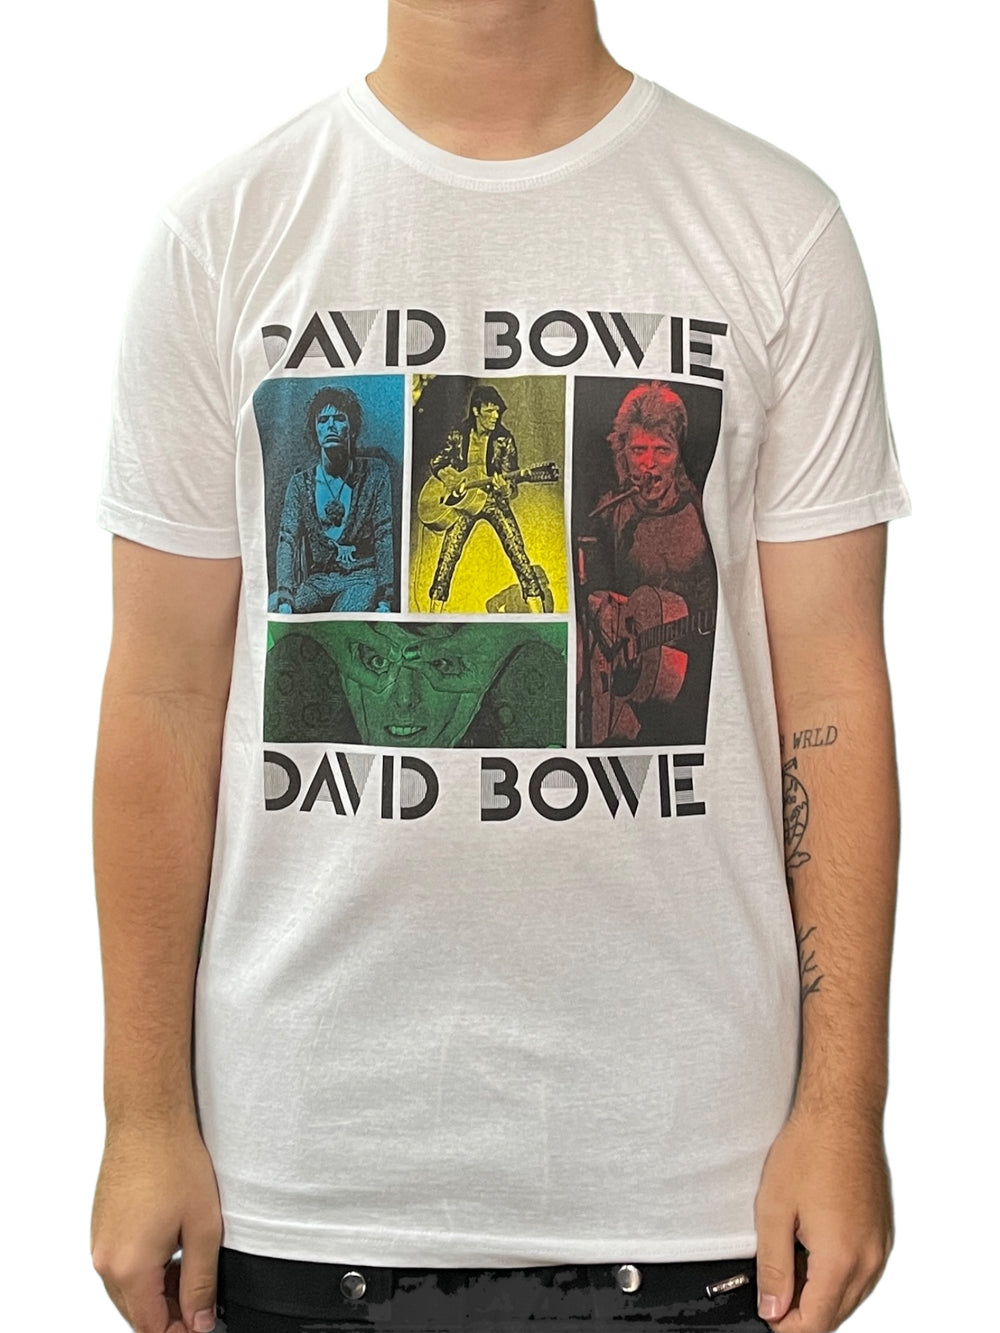 David Bowie - Mick Rock Photo Collage Unisex Official T Shirt Brand New Various Sizes